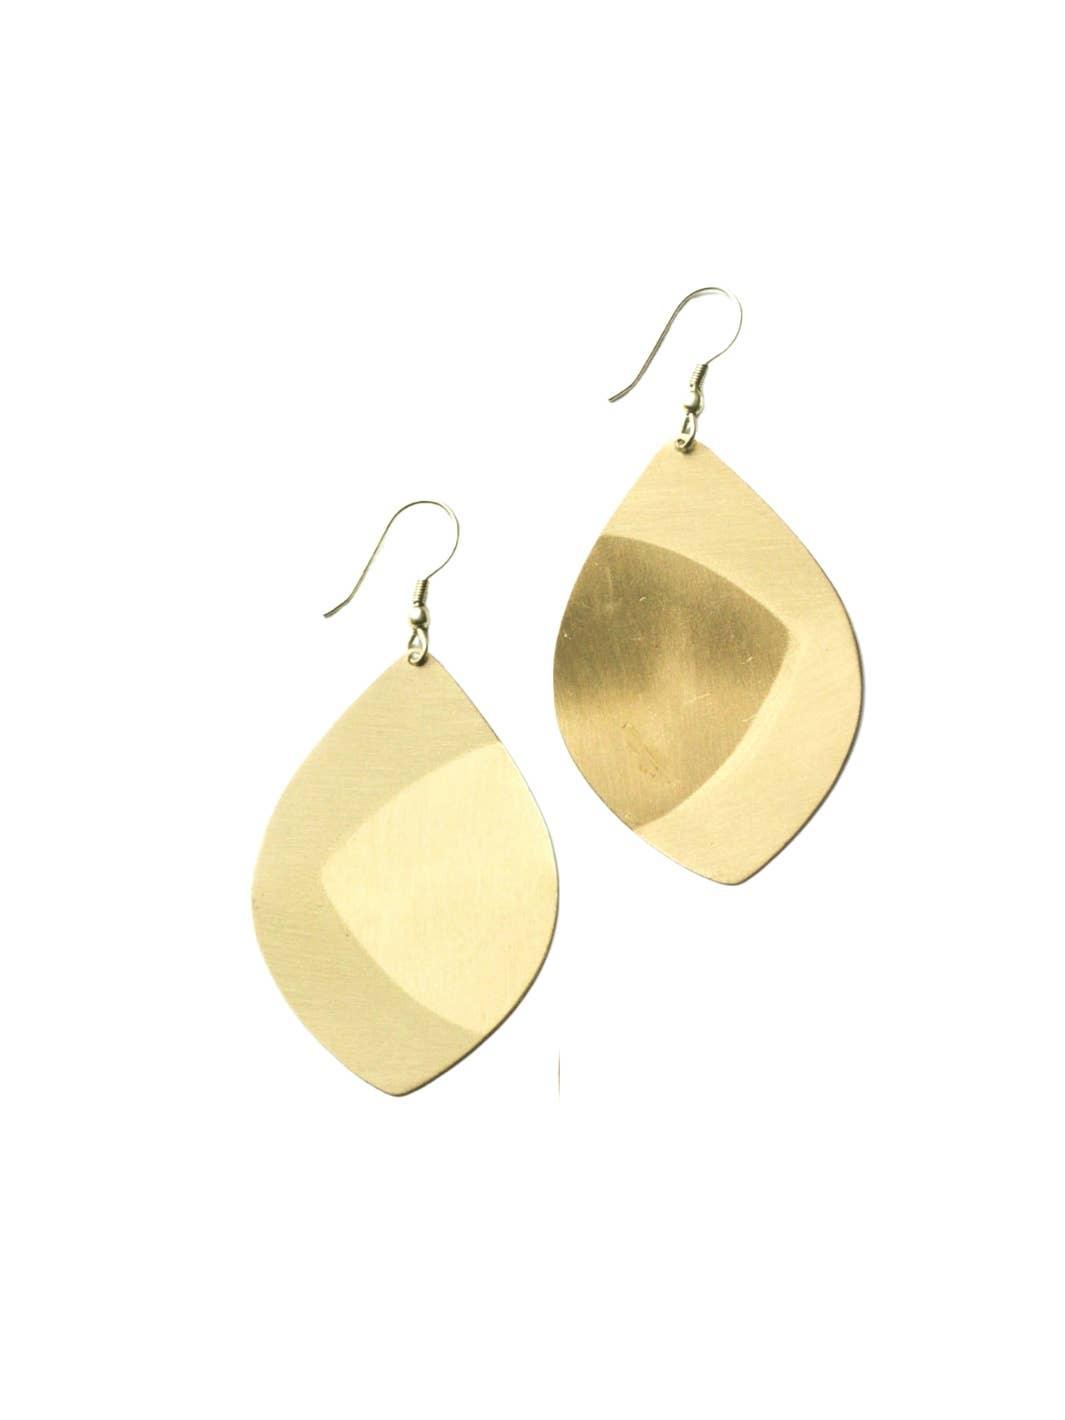 Convex Toned Earrings - Ethical Trade Co